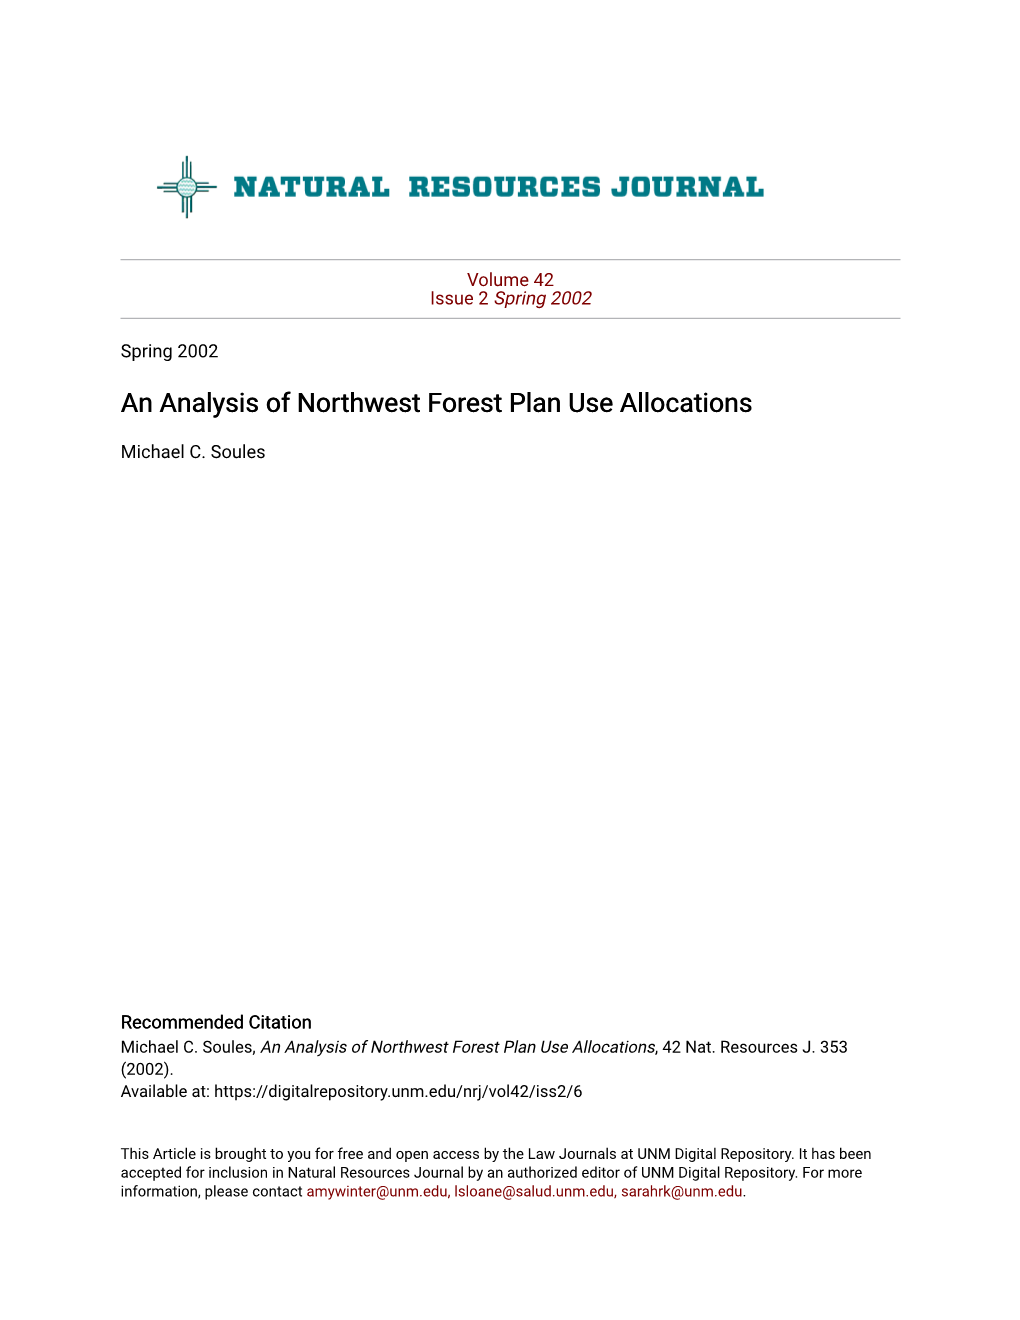 An Analysis of Northwest Forest Plan Use Allocations